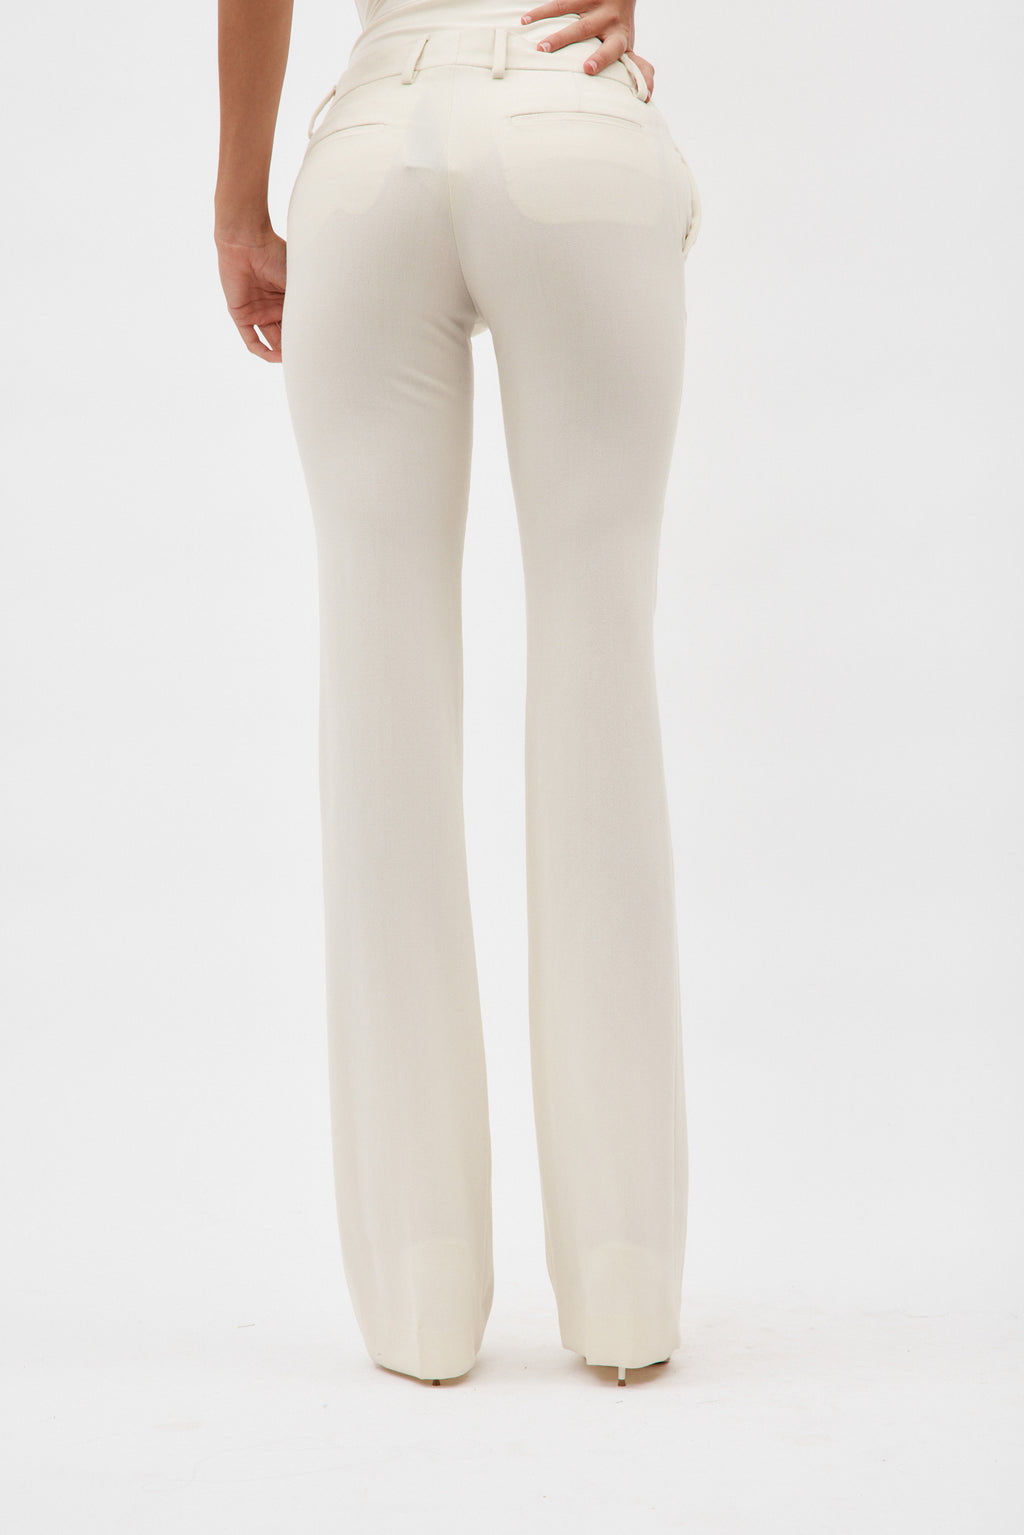 Geary Ivory Trousers